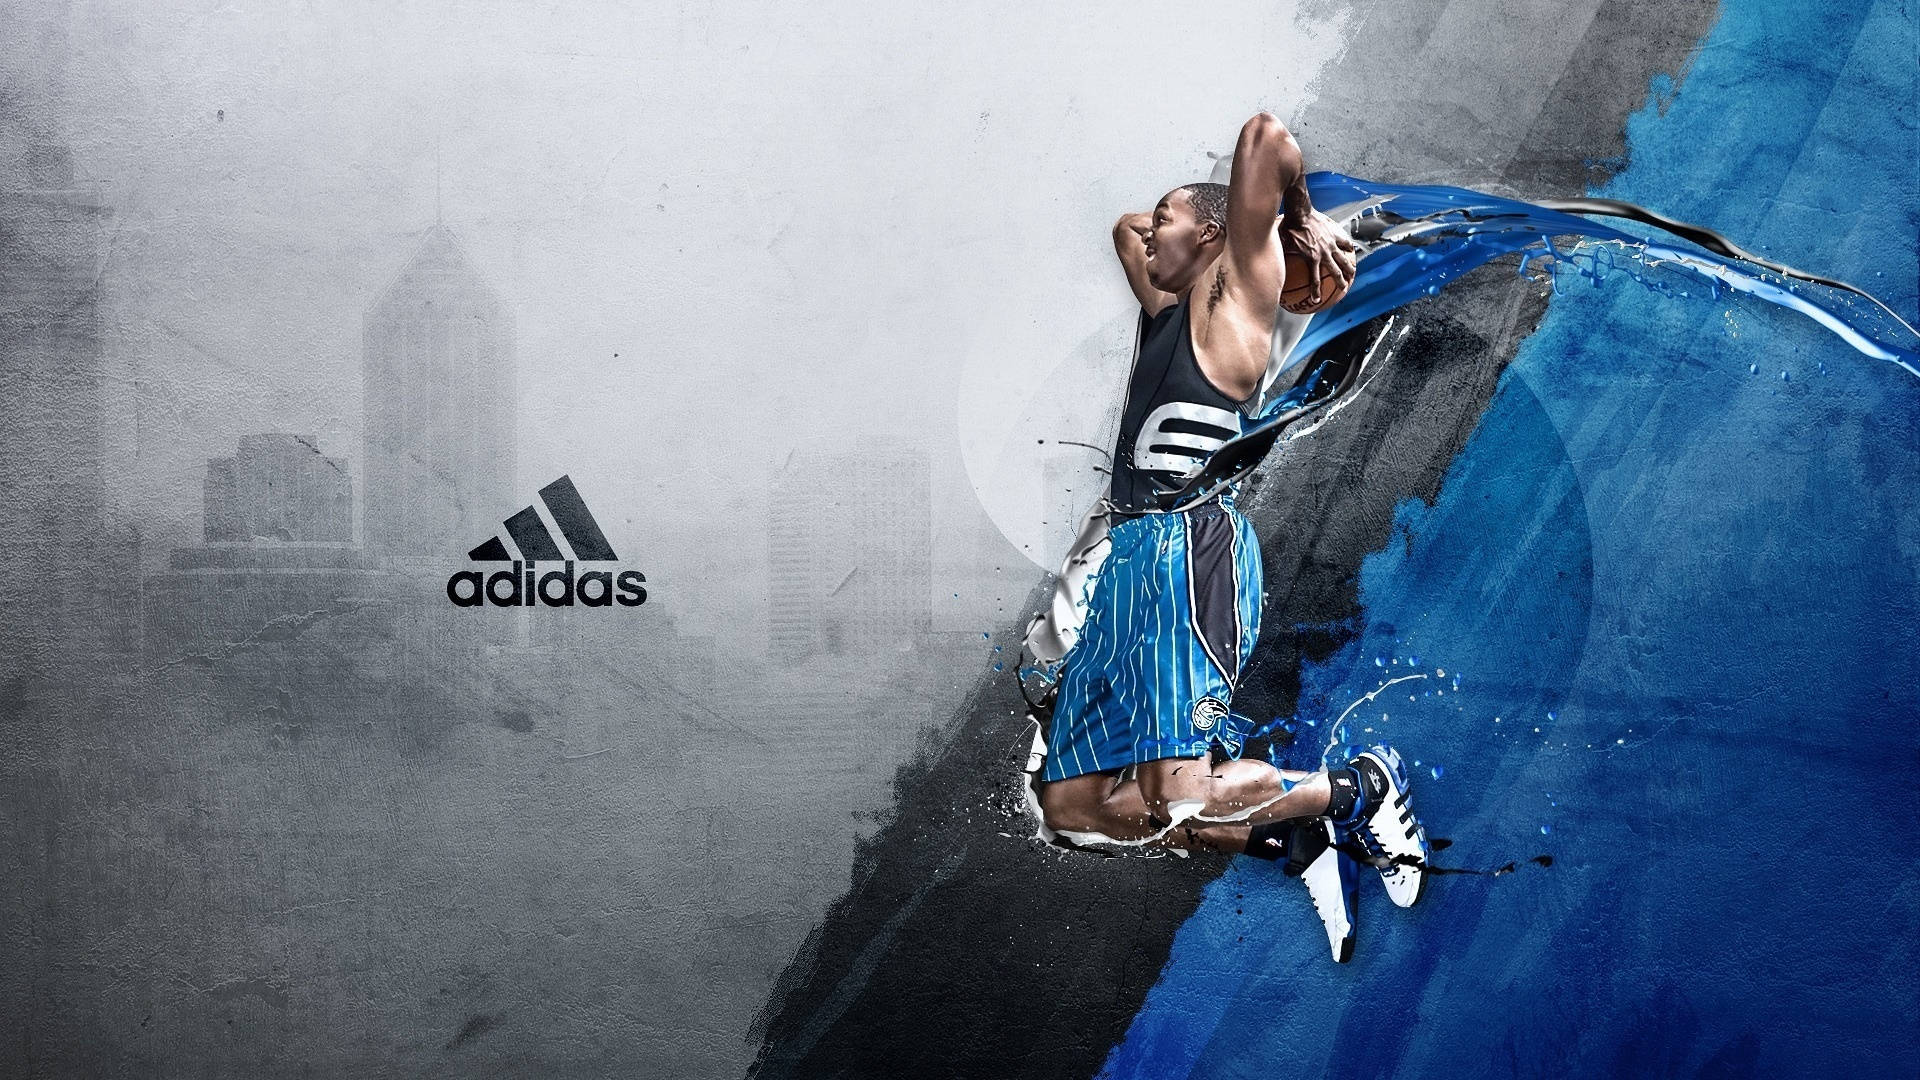 Athletic Themed Adidas Poster